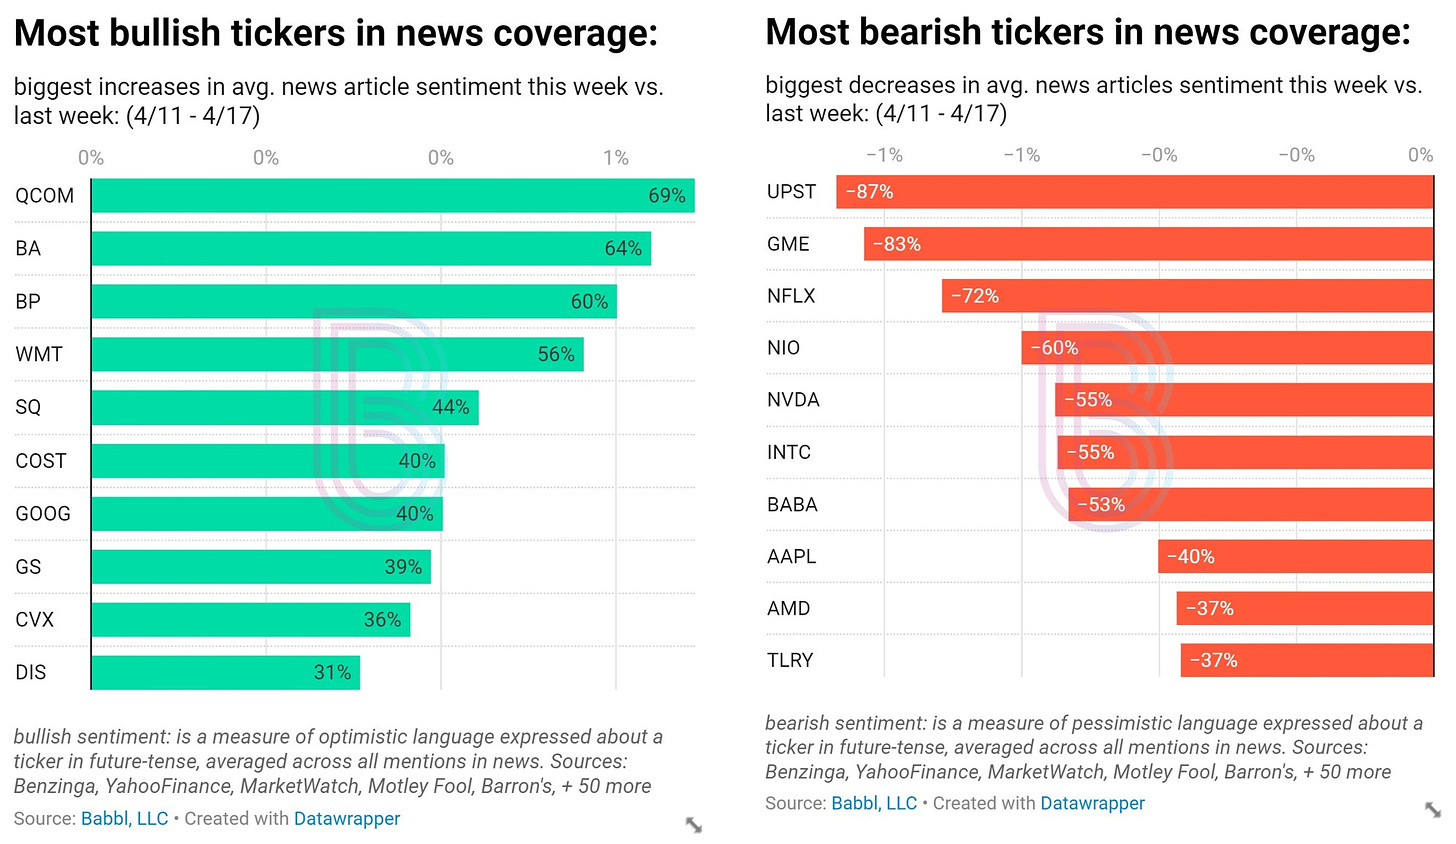 top 10 most bullish and bearish tickers in this week's news coverage